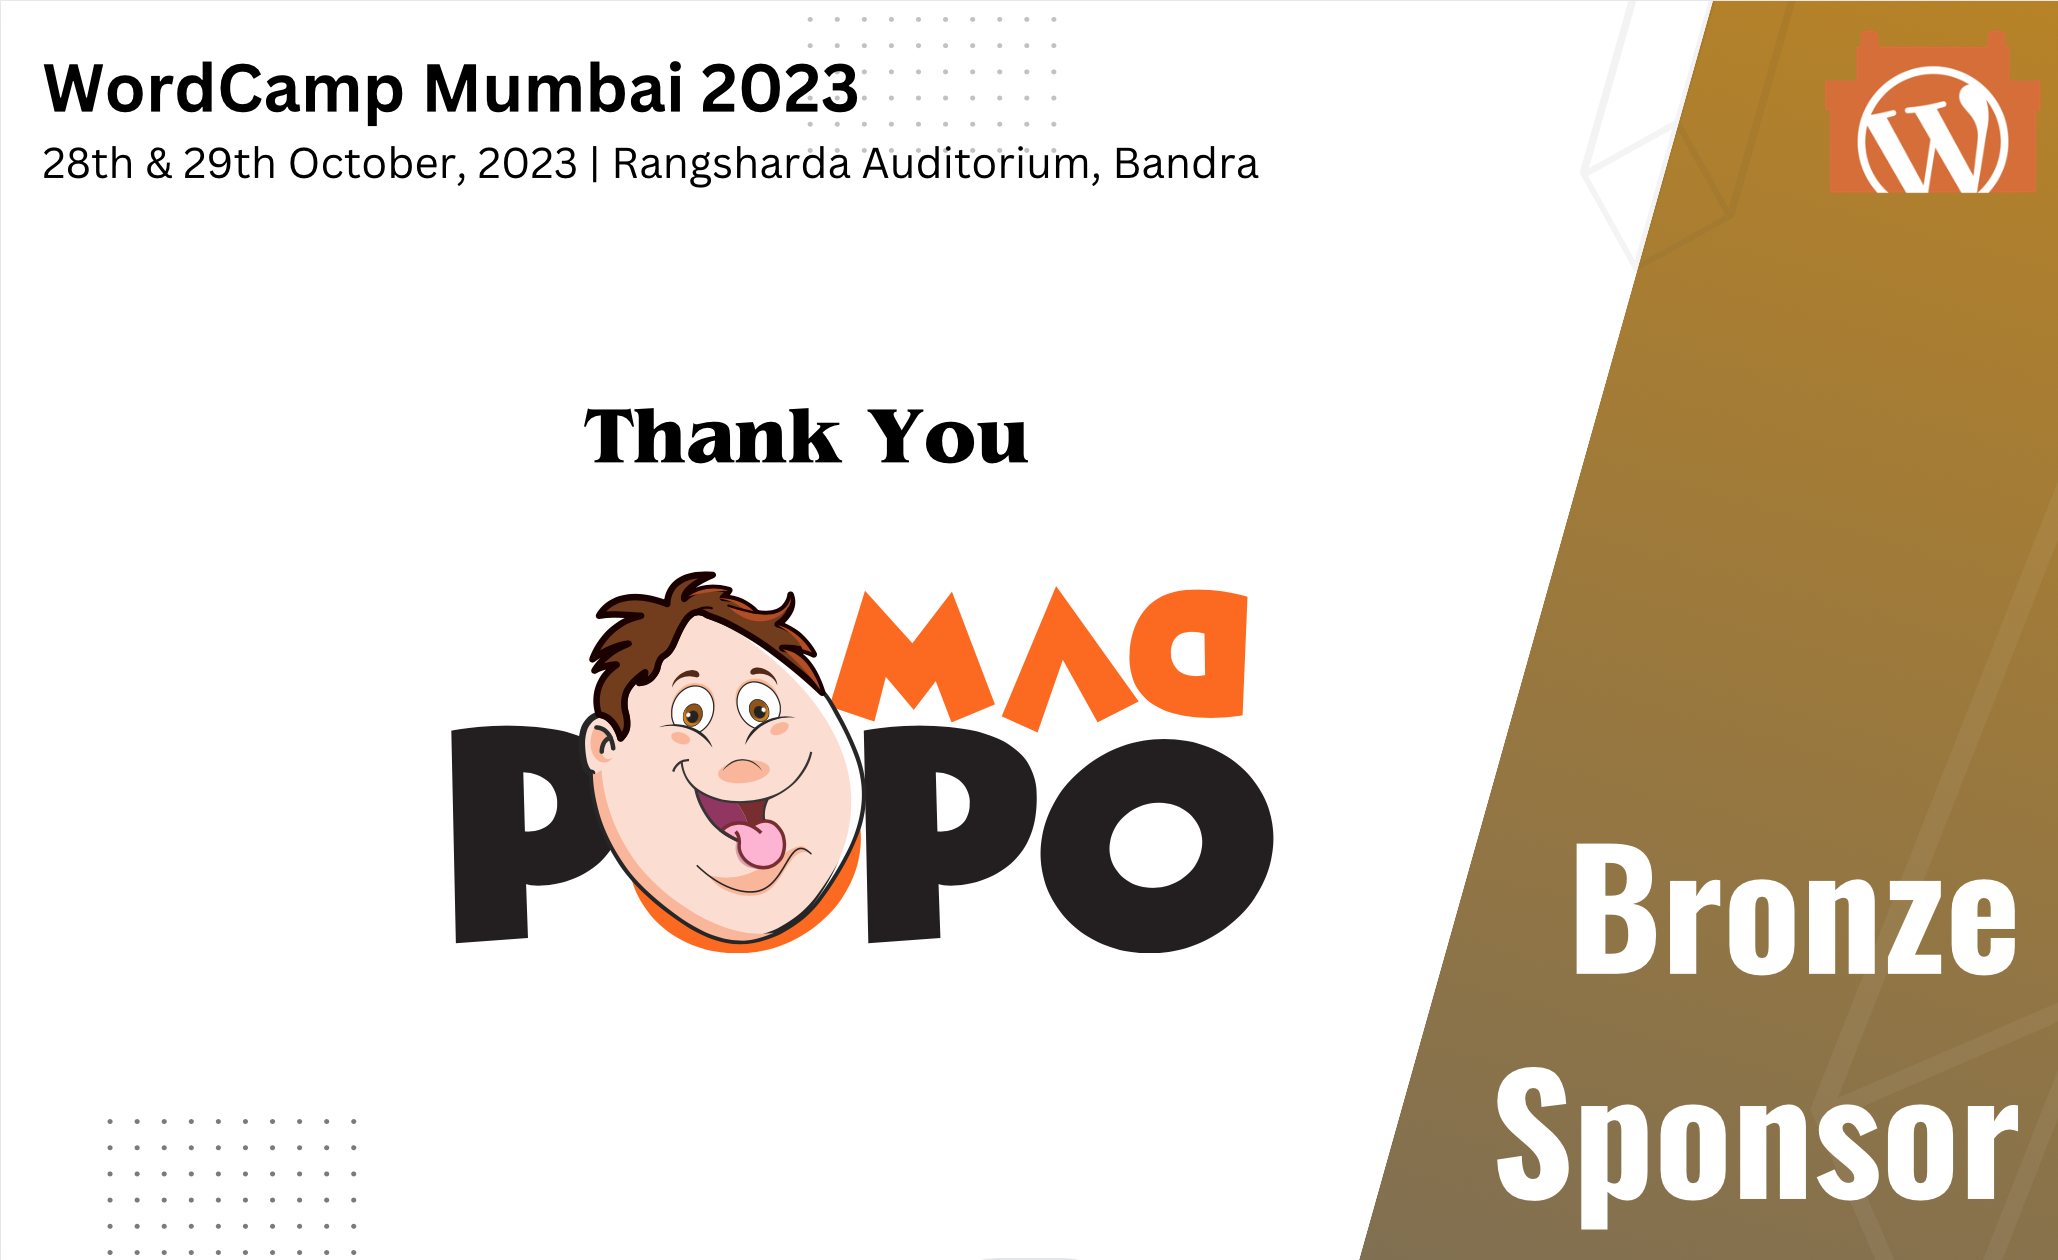 Thank You MadPopo, for being our Bronze Sponsor